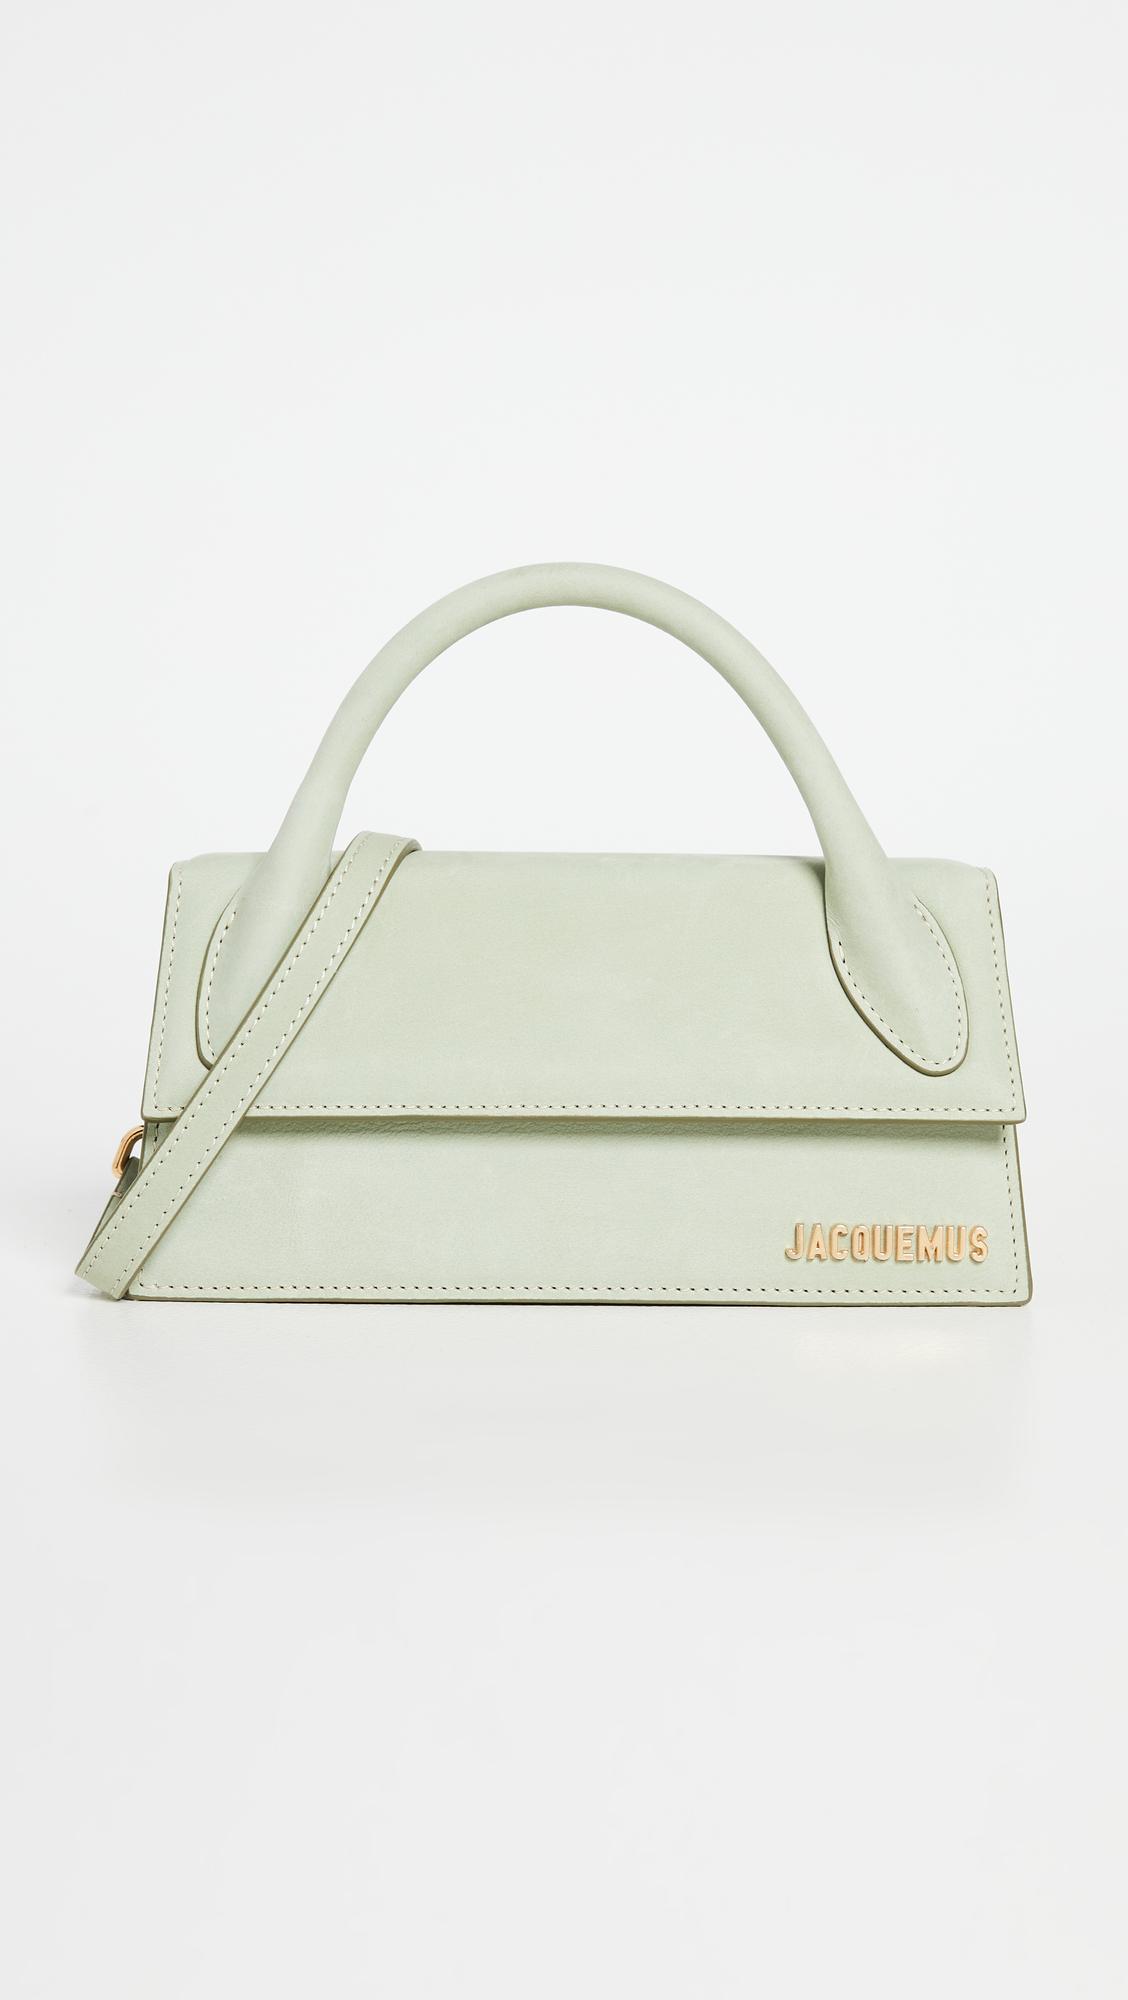 JACQUEMUS Le Chiquito Long Bag in Green